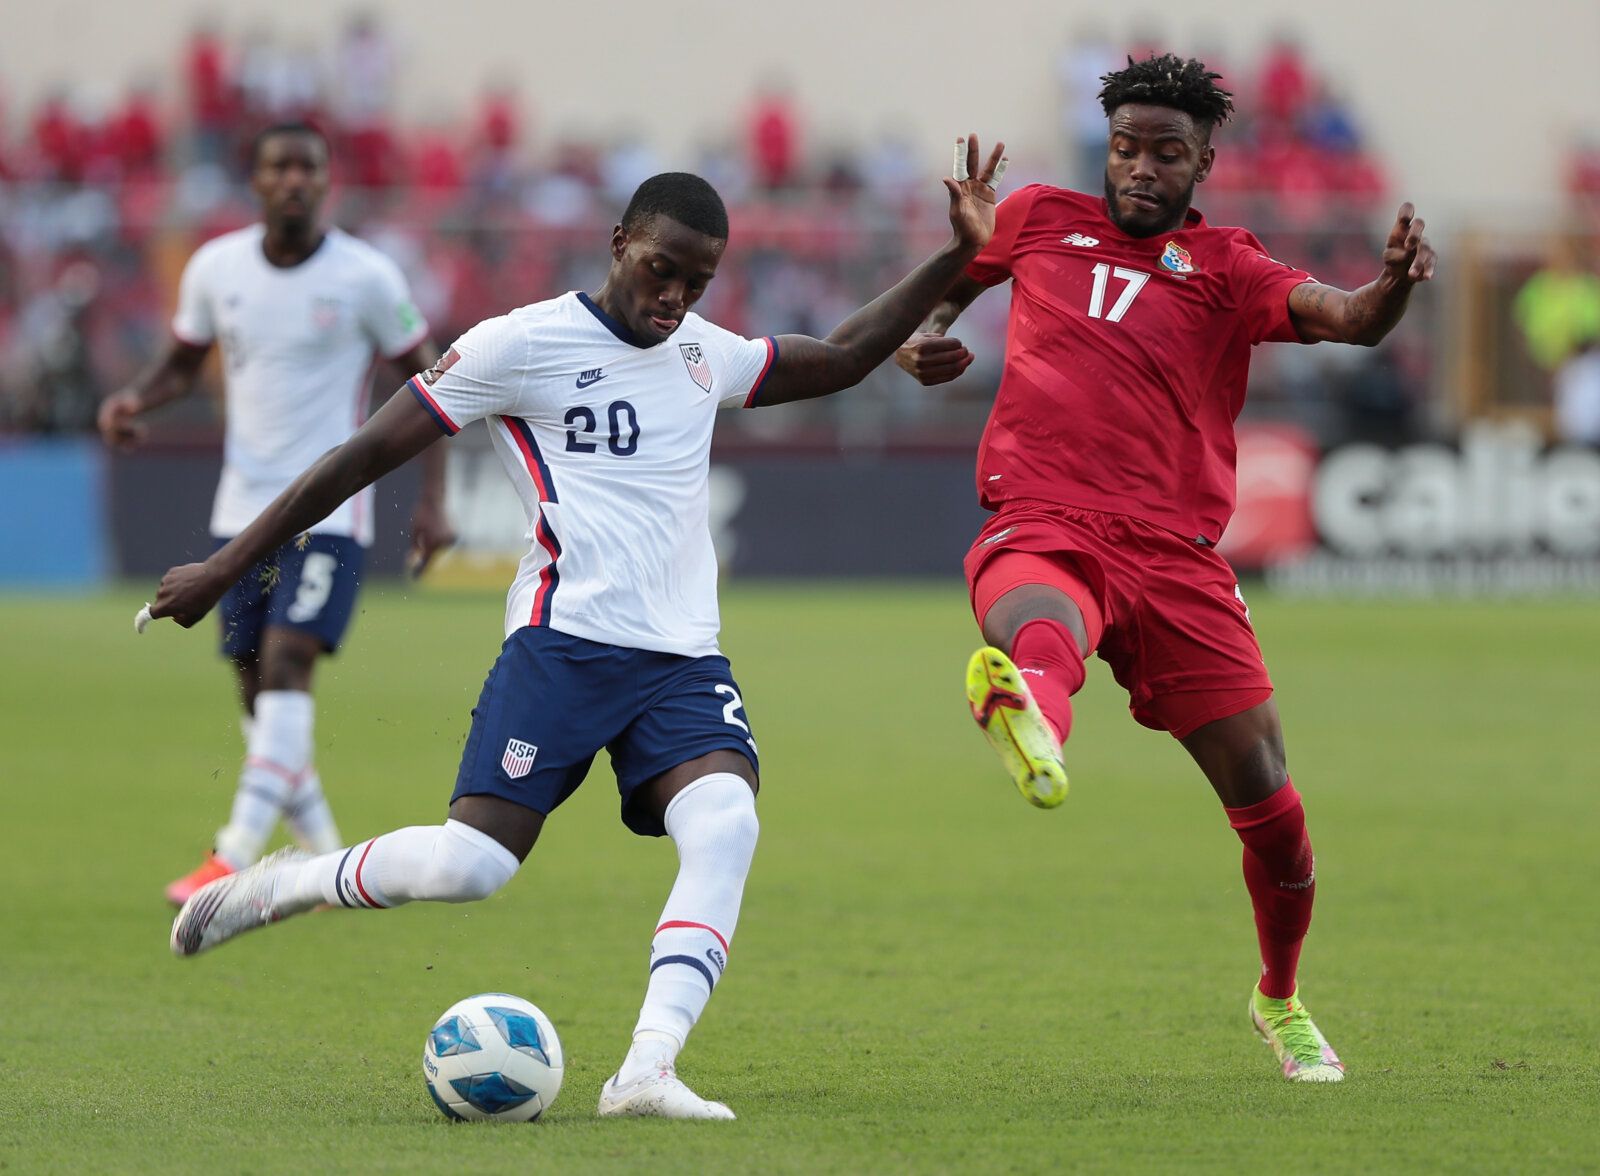 Soccer Football - World Cup - CONCACAF Qualifiers - Panama v United States - Estadio Rommel Fernandez, Panama City, Panama - October 10, 2021 Timothy Weah of the U.S. in action with Panama's Freddy Gondola REUTERS/Erick Marciscano